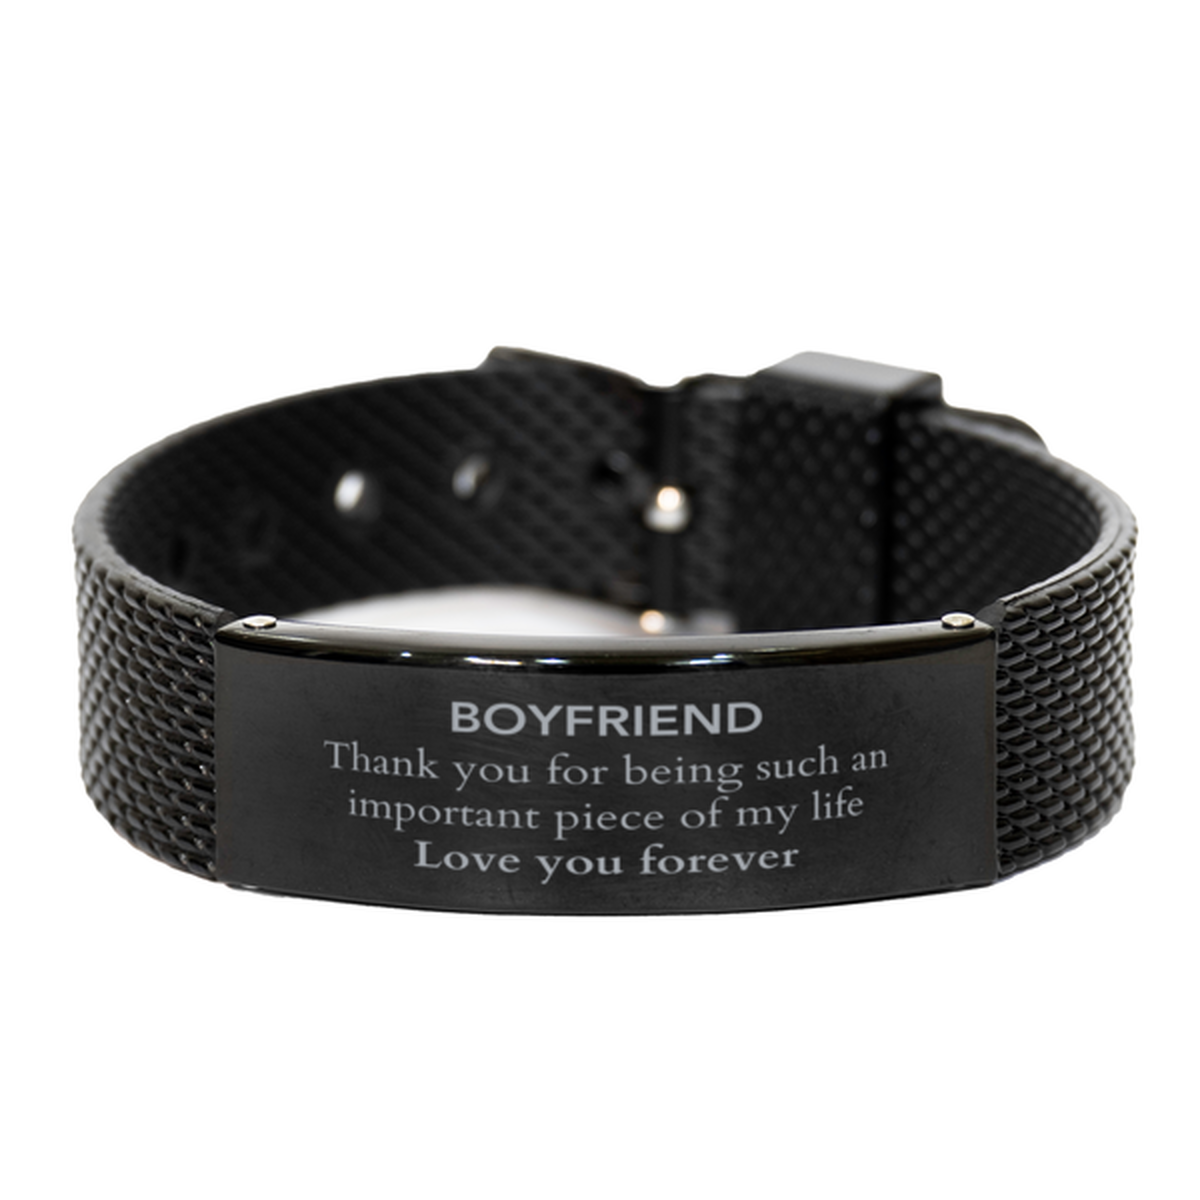 Appropriate Boyfriend Black Shark Mesh Bracelet Epic Birthday Gifts for Boyfriend Thank you for being such an important piece of my life Boyfriend Christmas Mothers Fathers Day